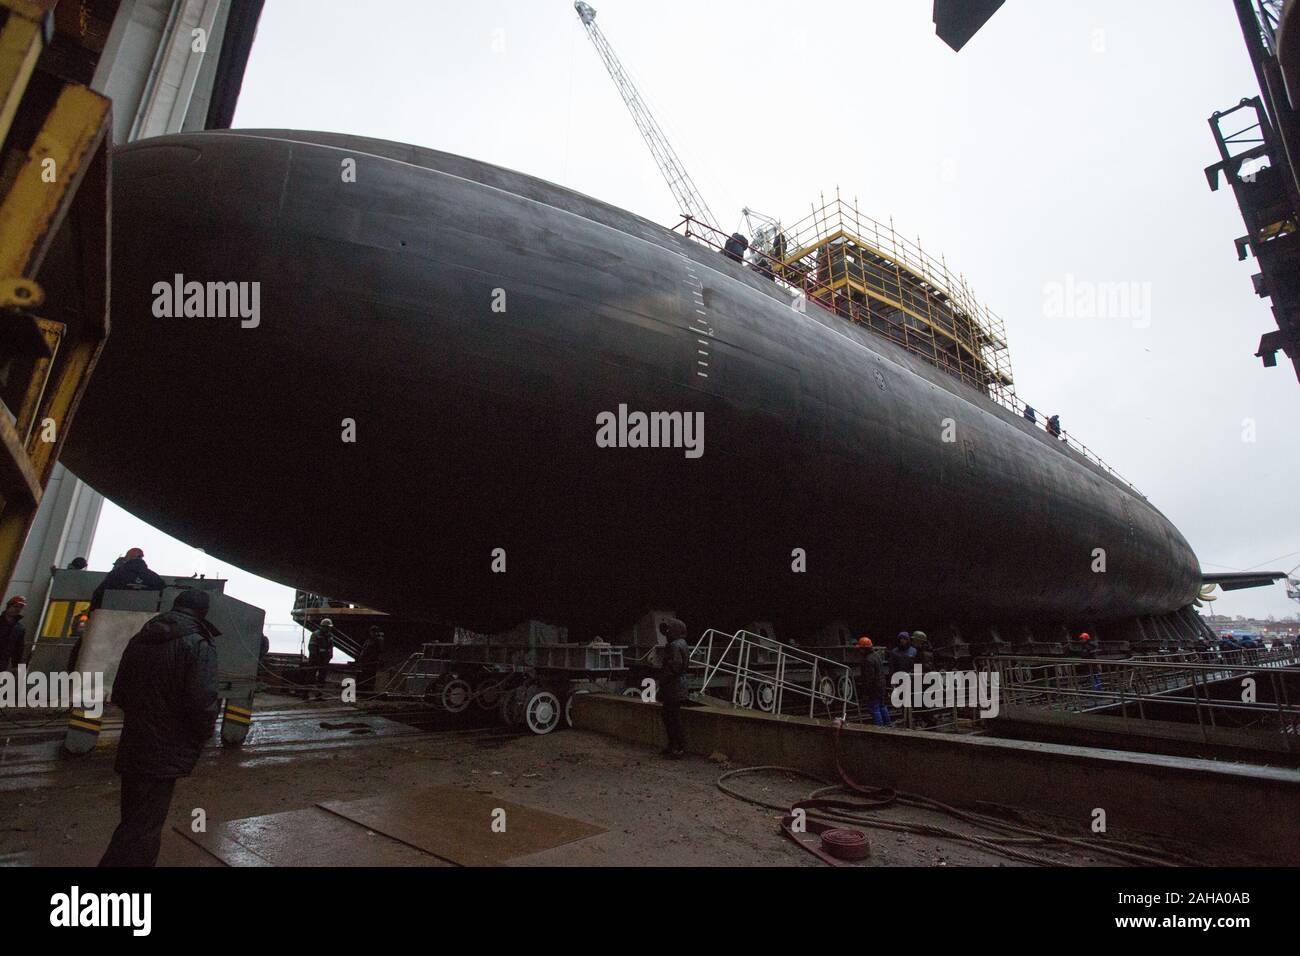 St. Petersburg, Russia. 26th Dec, 2019. Submarine Volkhov is seen before diving into the water in St. Petersburg, Russia, Dec. 26, 2019. Volkhov, built for Russian Pacific Fleet by Admiralty Shipyard, dived into the water in St. Petersburg on Thursday. Credit: Irina Motina/Xinhua/Alamy Live News Stock Photo